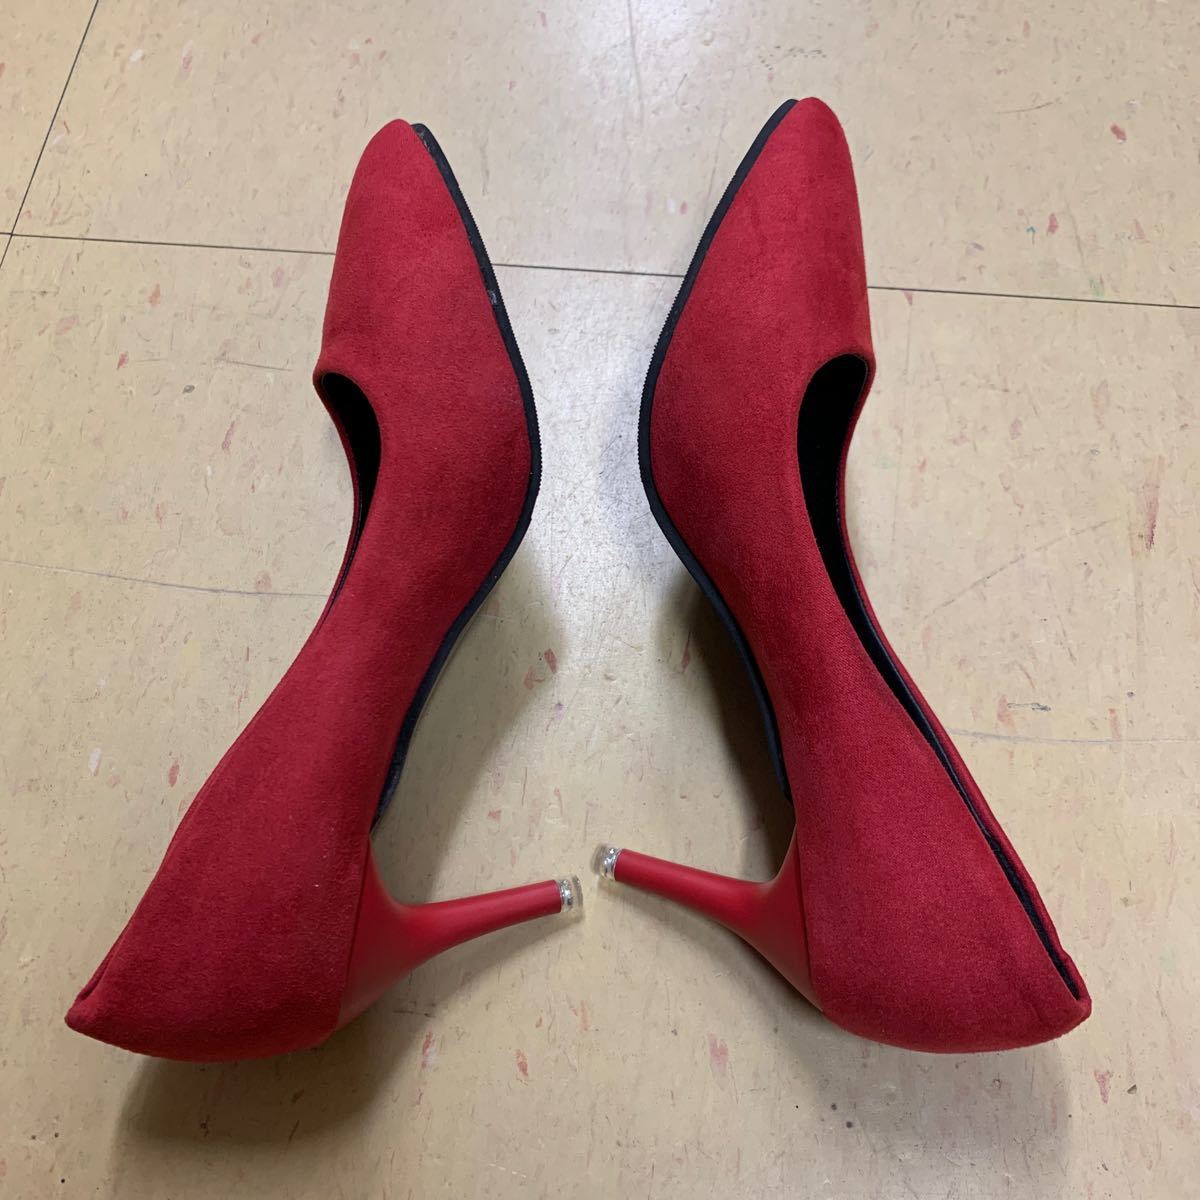  new goods beautiful goods approximately 7cm heel suede style pumps red 24cm 24 centimeter 7 centimeter 24.0 red high heel pin heel velour style . hand shoes lady's 